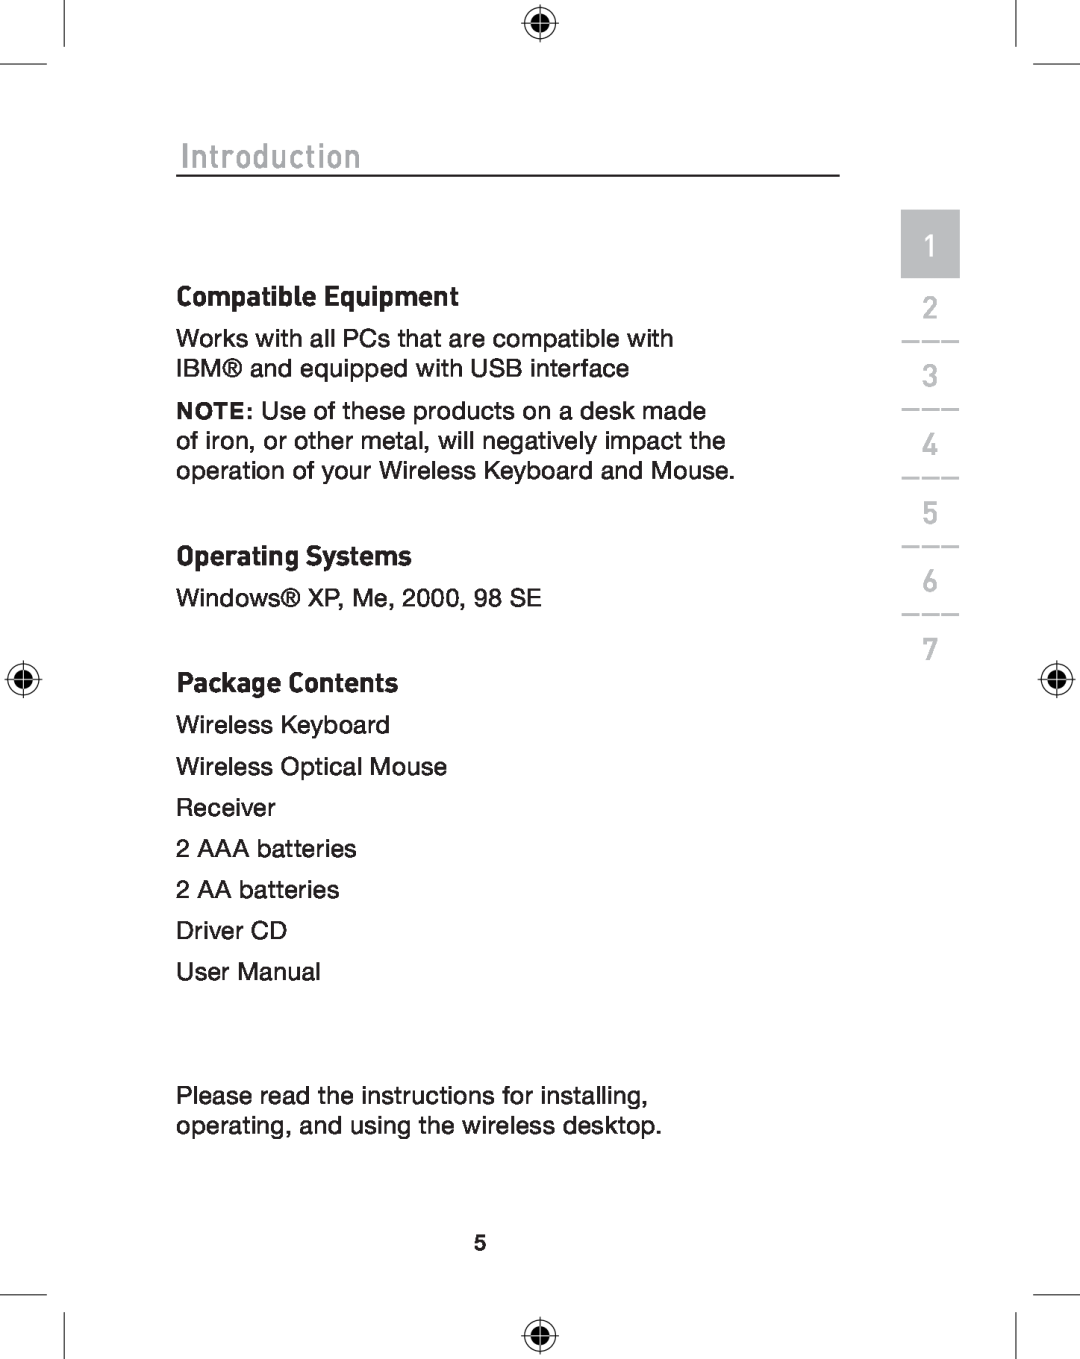 Belkin P74775UK, F8E849-BNDL user manual Introduction, Compatible Equipment, Operating Systems, Package Contents 